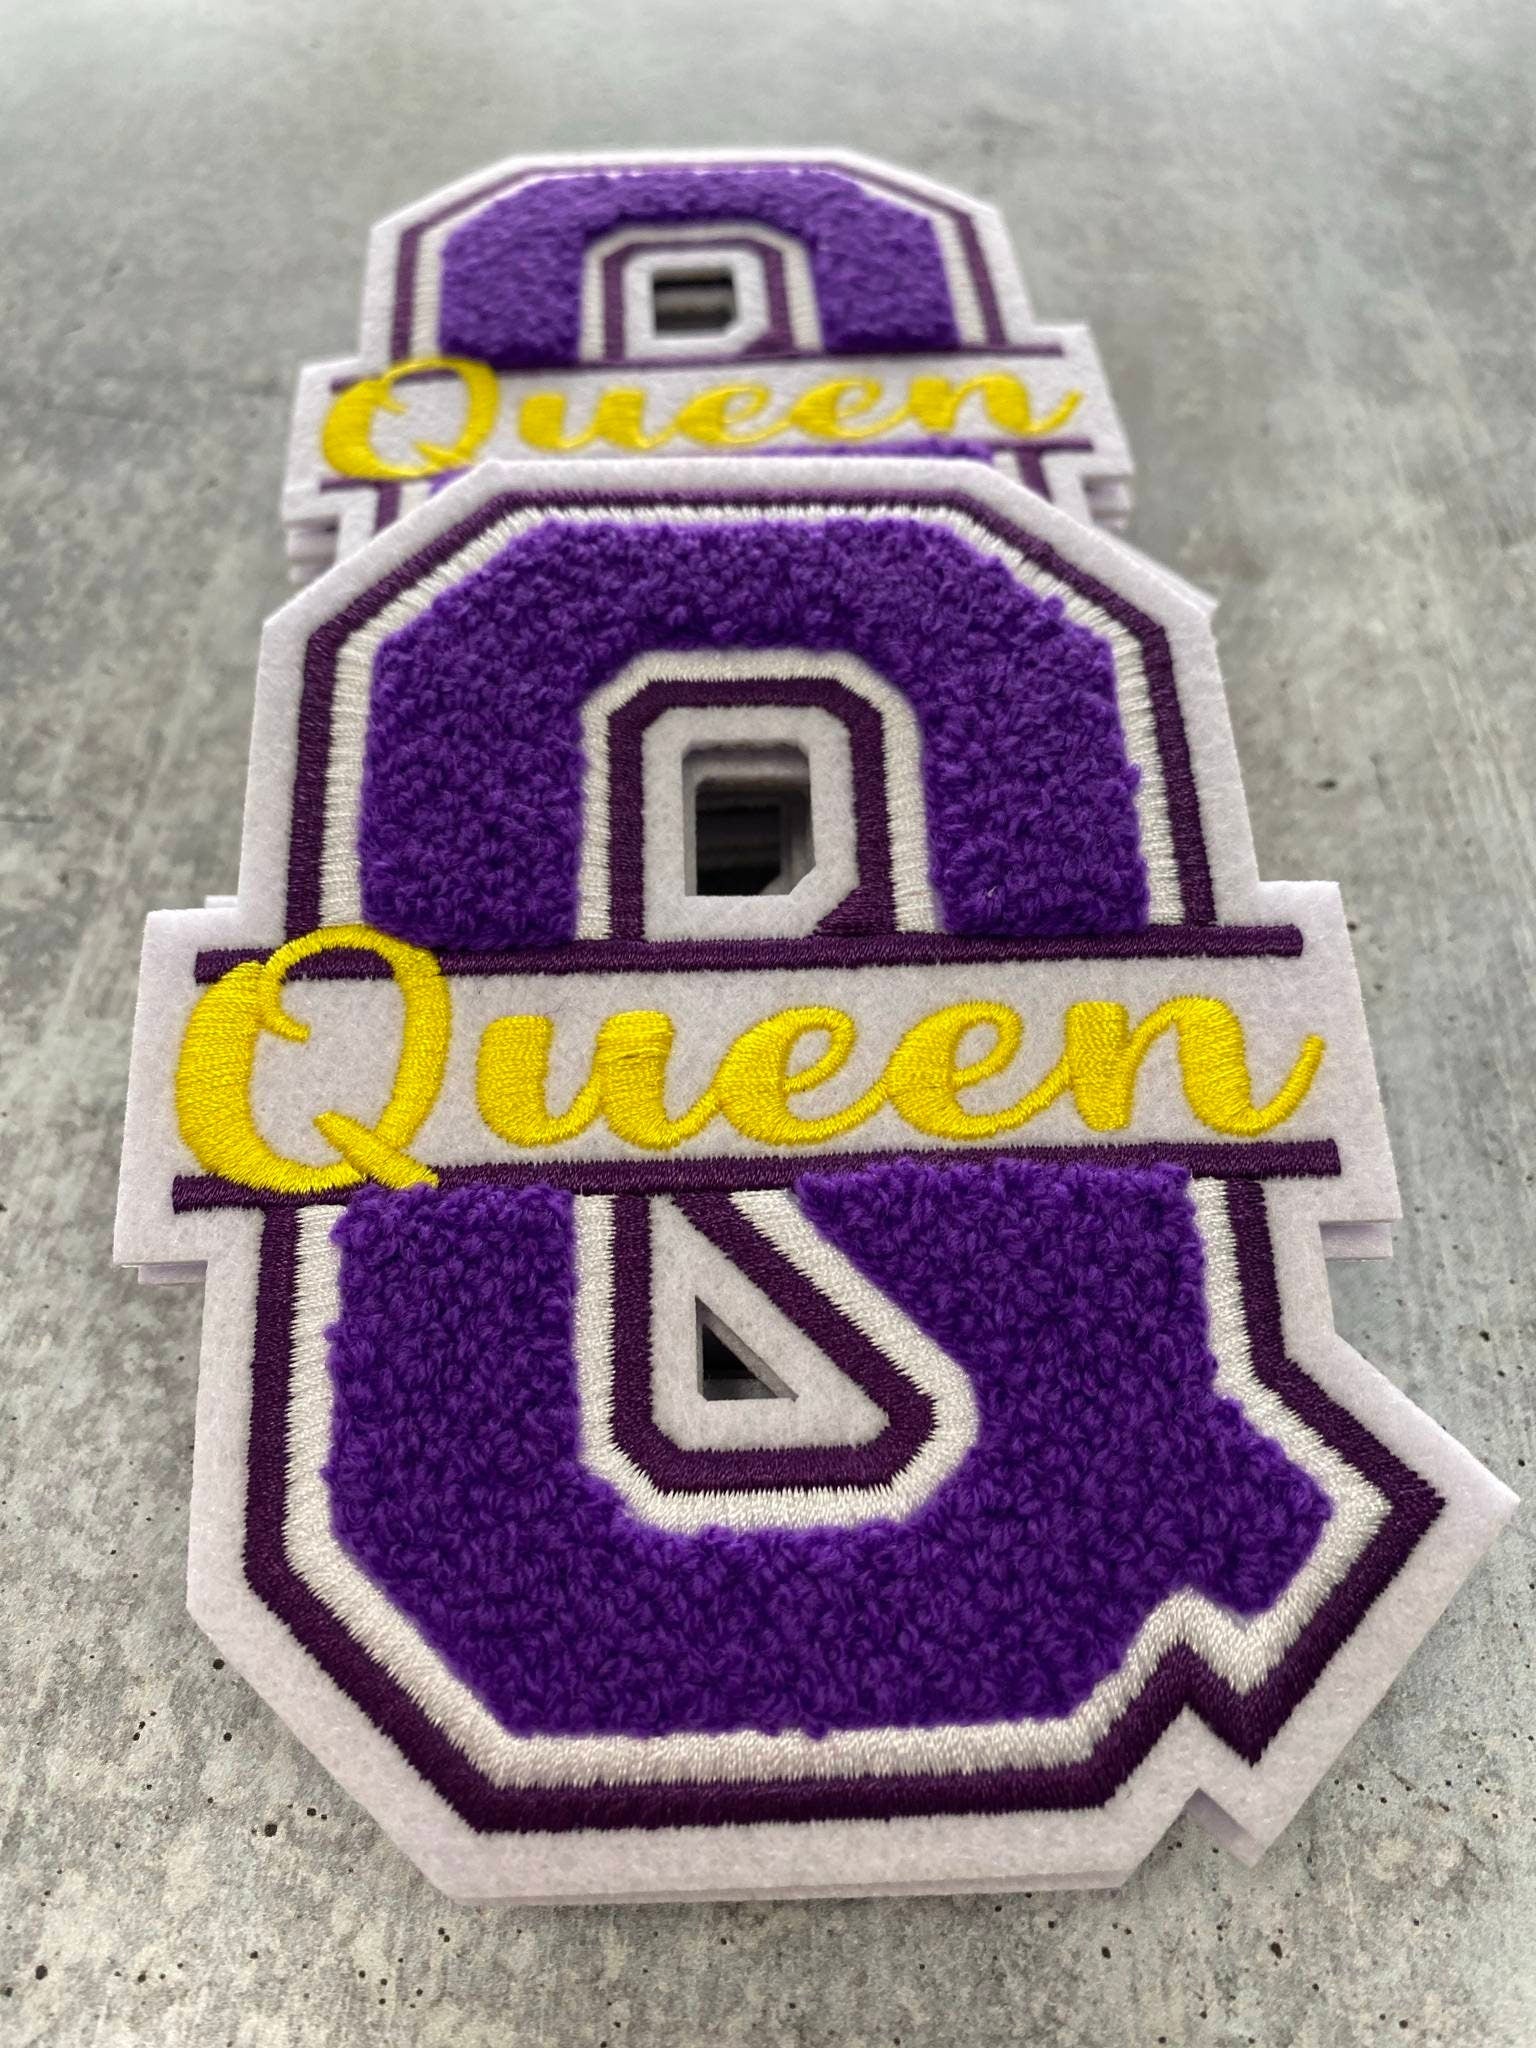 Chenille, Monogram Letter, "Q" Embroidered Word QUEEN, Purple, Yellow, White, Size 6", Iron-on Backing, Med Applique, Varsity Patch